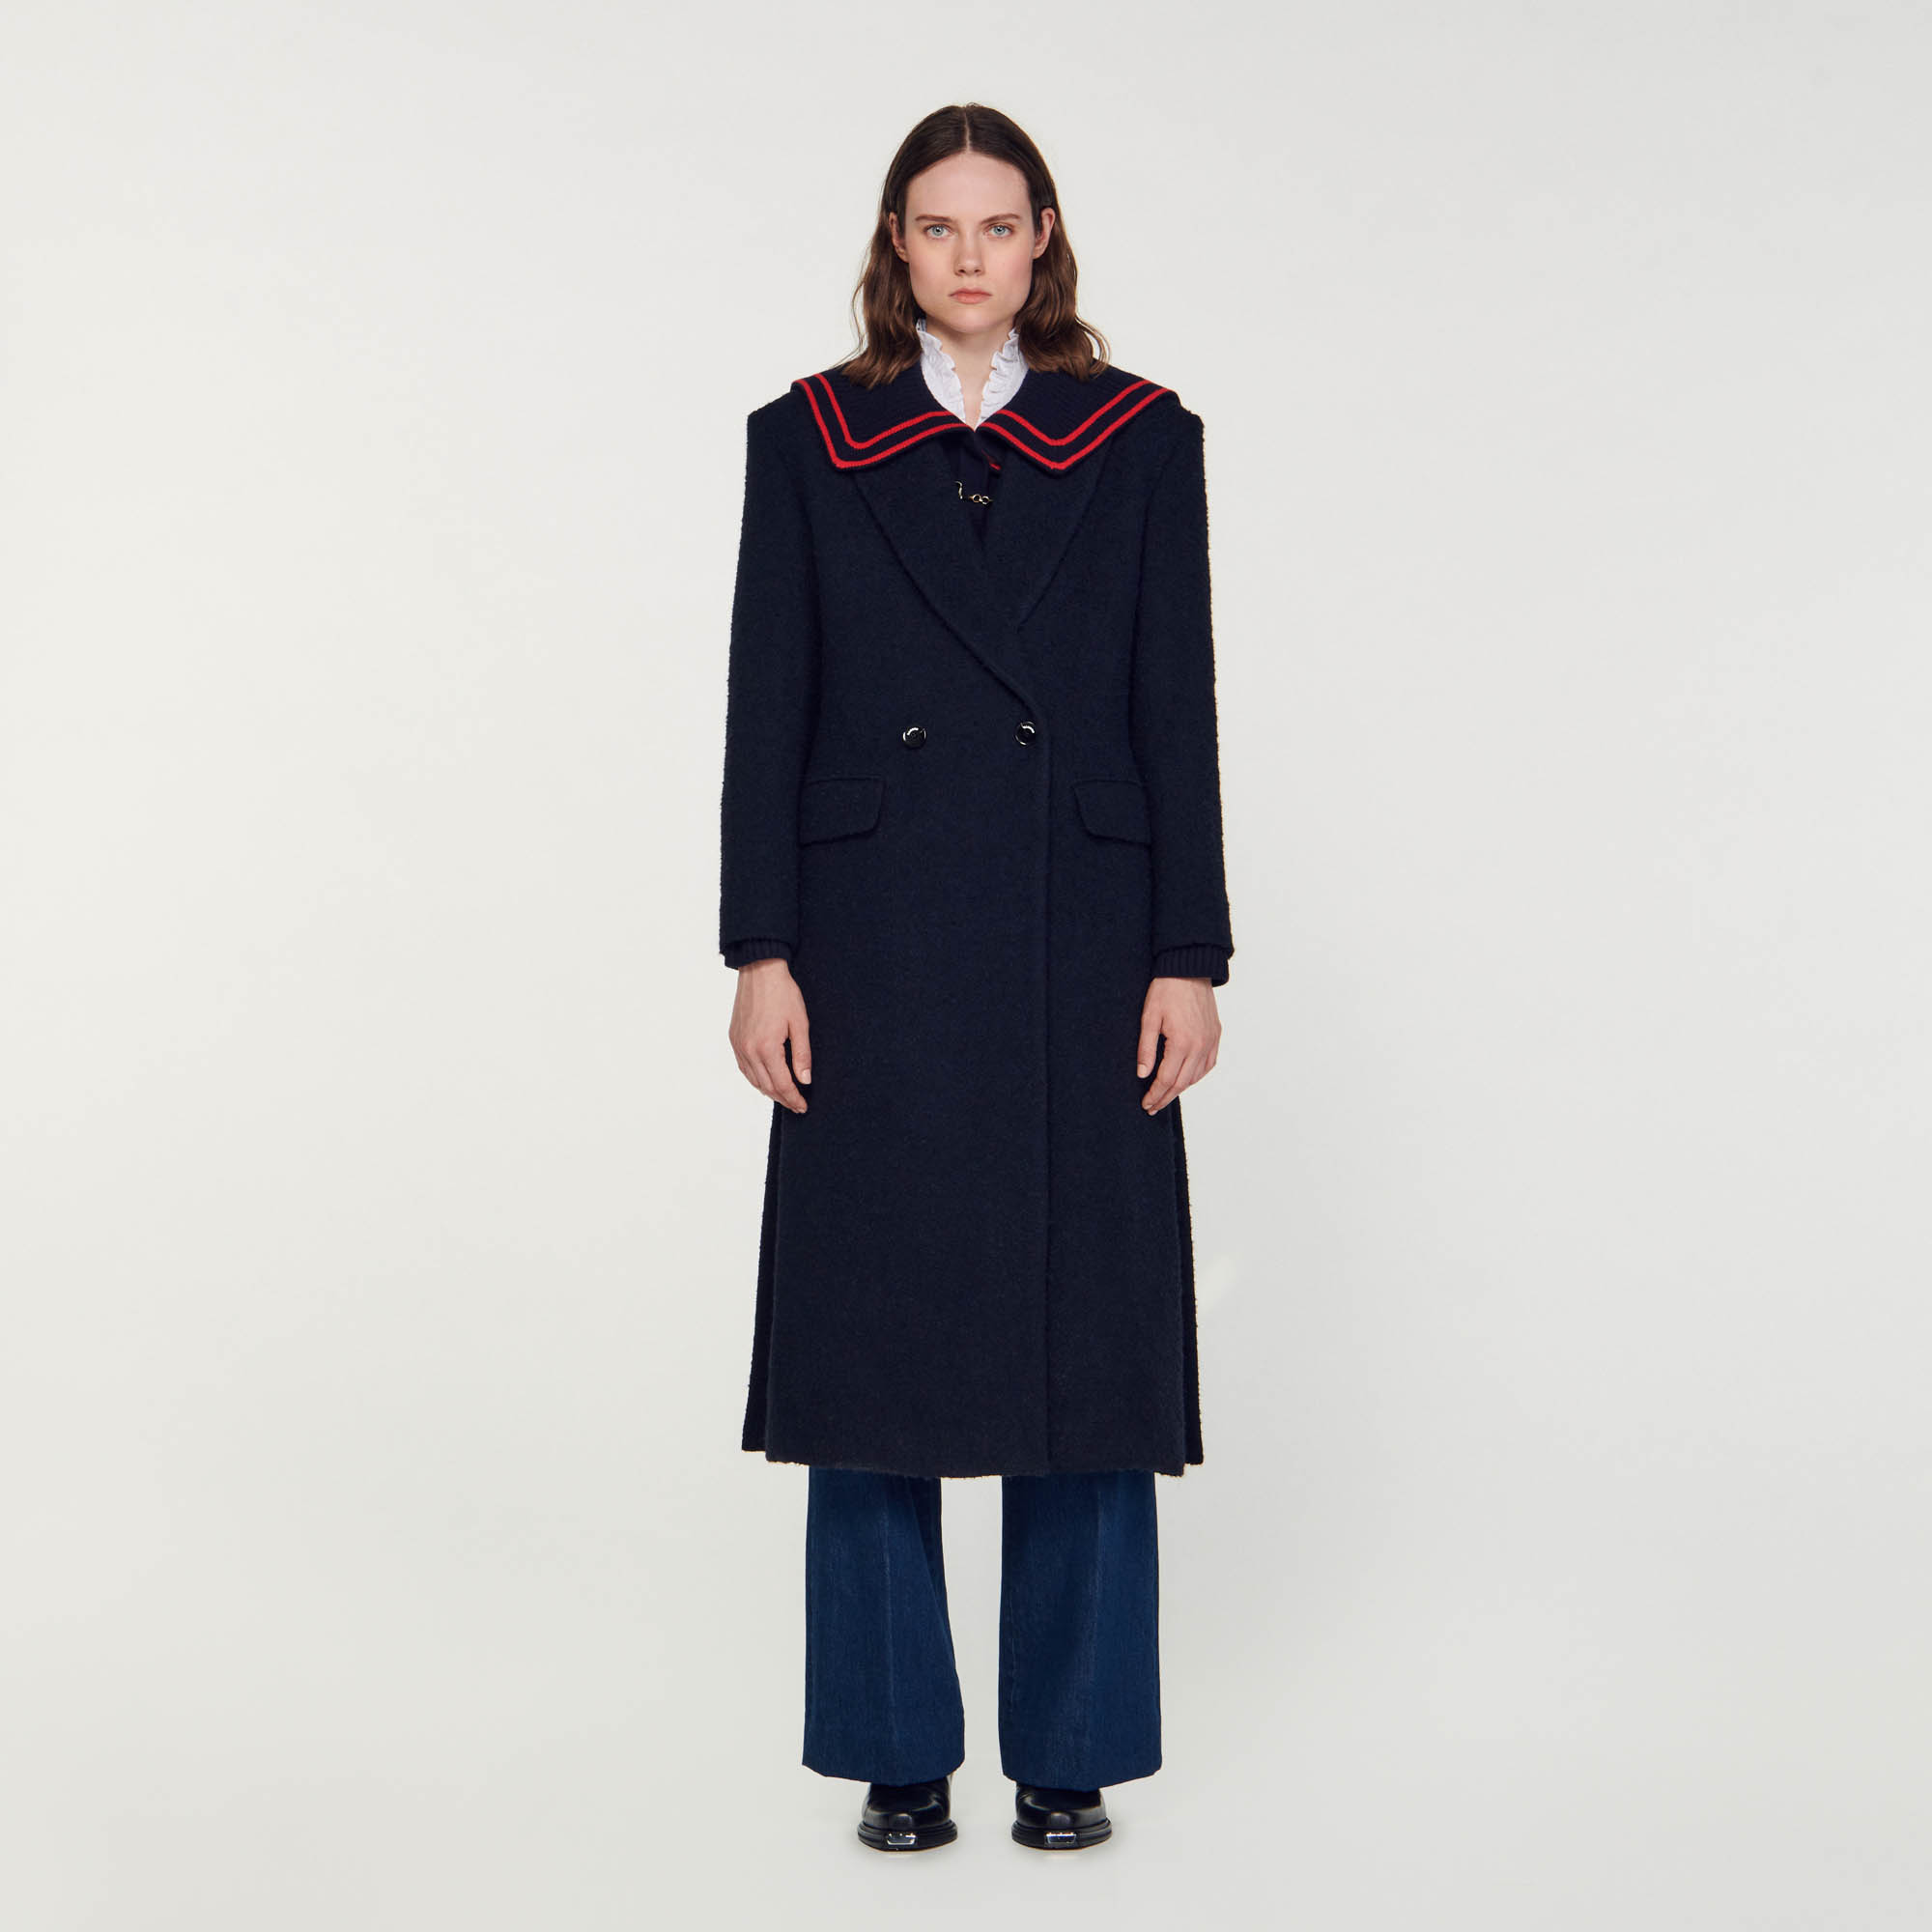 Sandro cotton Long coat in wool bouclé fabric, featuring a lapel collar, long sleeves, a double-breasted design and flap pockets